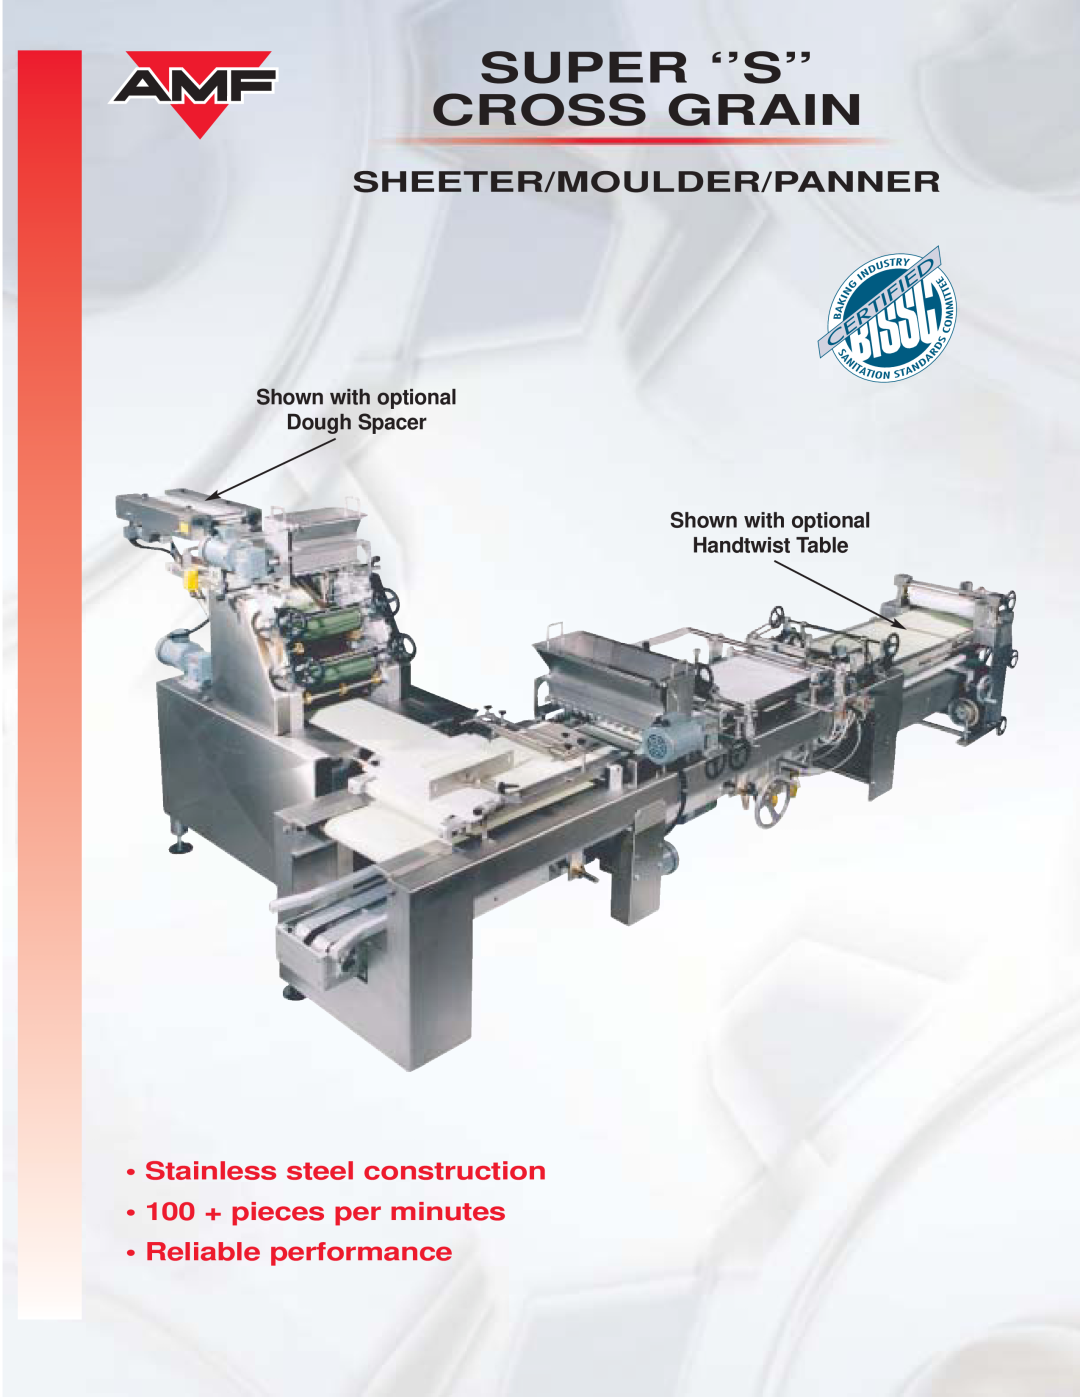 AMF Super Cross Grain Sheeter manual Shown with optional Dough Spacer, Shown with optional Handtwist Table 